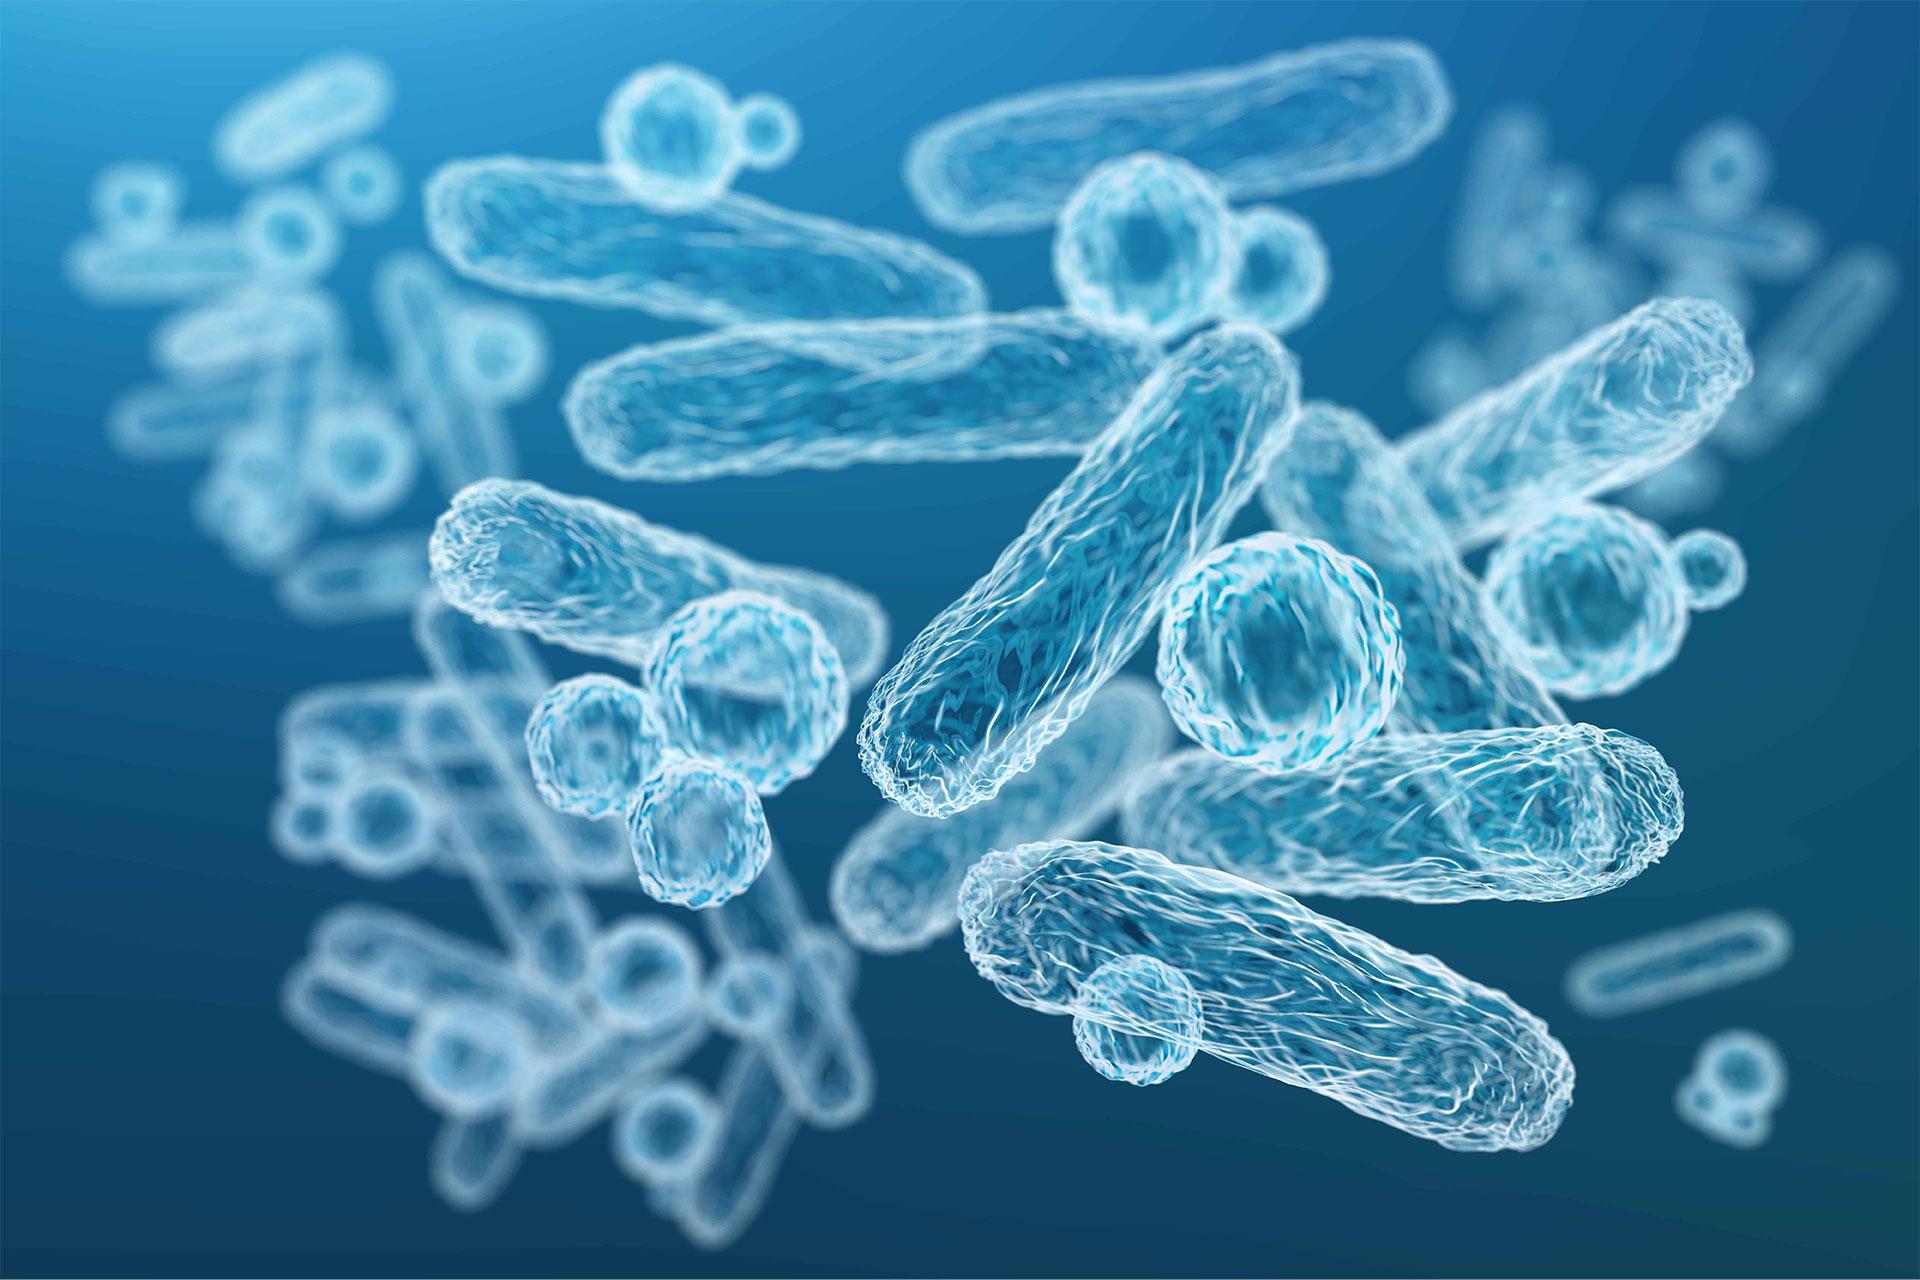 microbiome-background-image